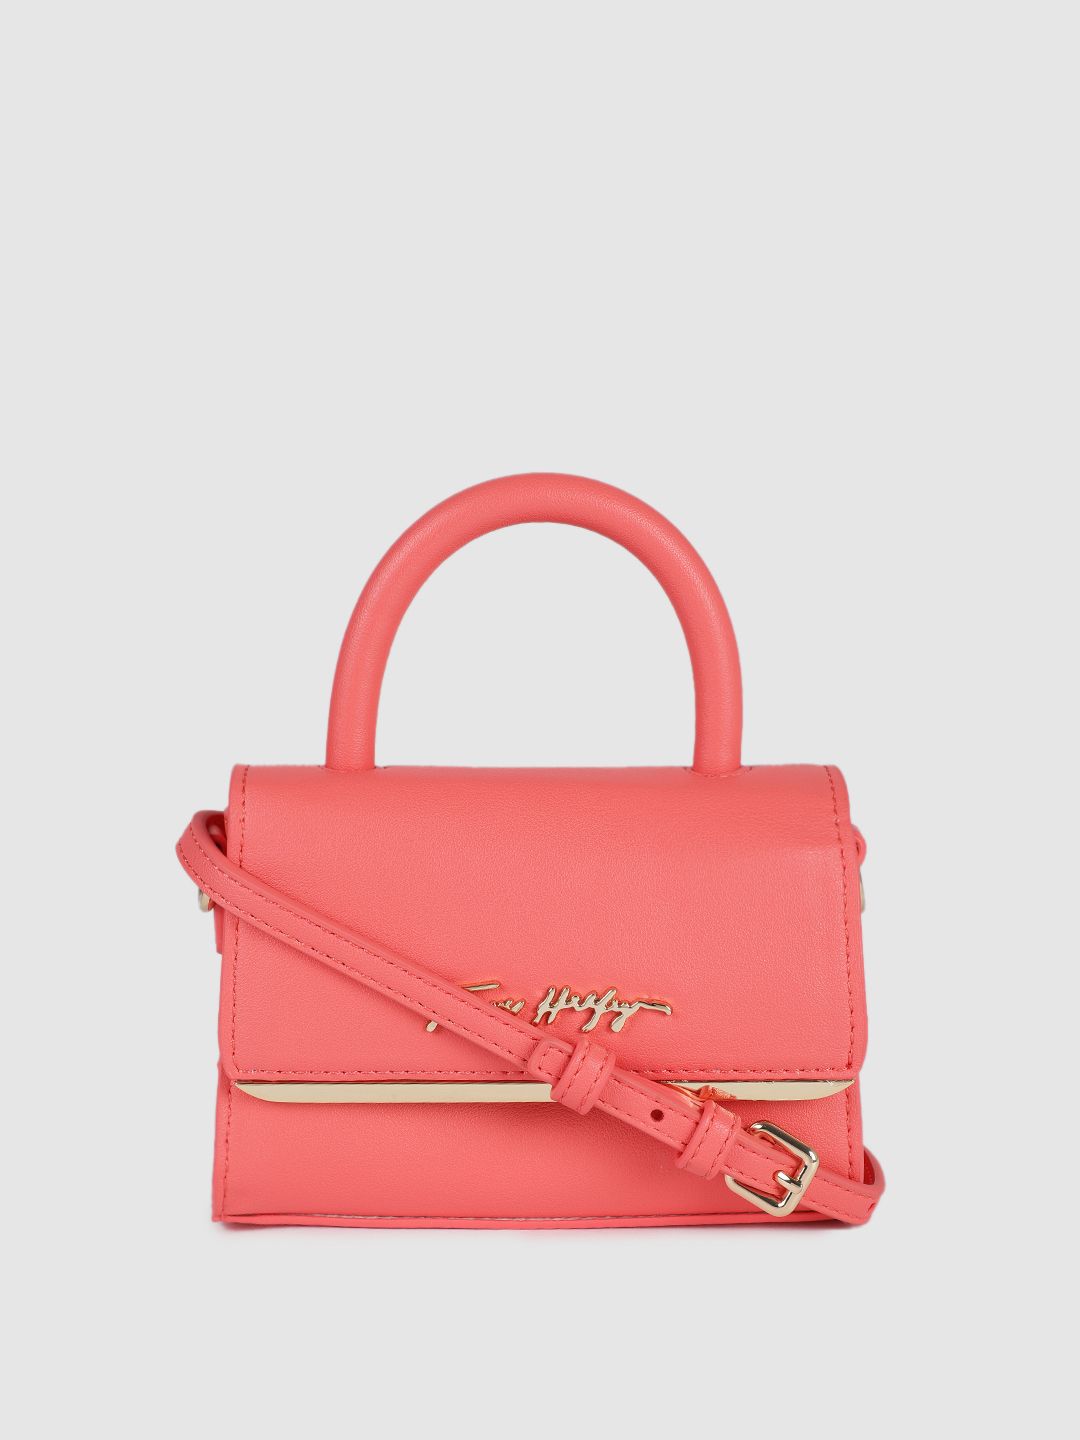 Tommy Hilfiger Coral Red Solid Structured Handheld Bag Price in India